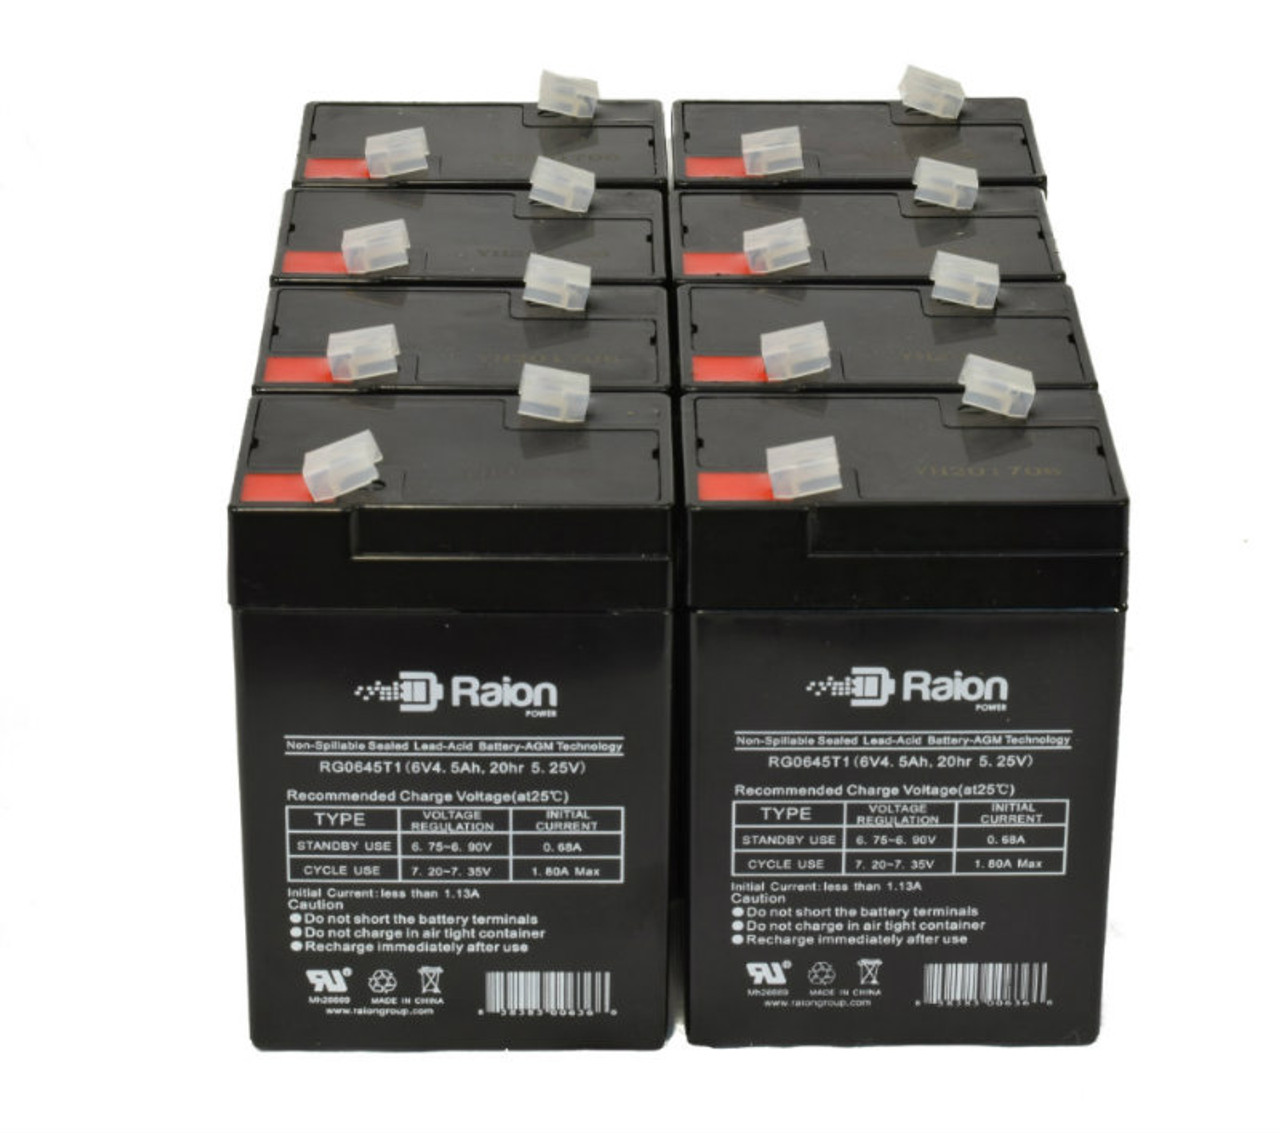 Raion Power 6V 4.5Ah Replacement Emergency Light Battery for Technacell EP1640 - 8 Pack